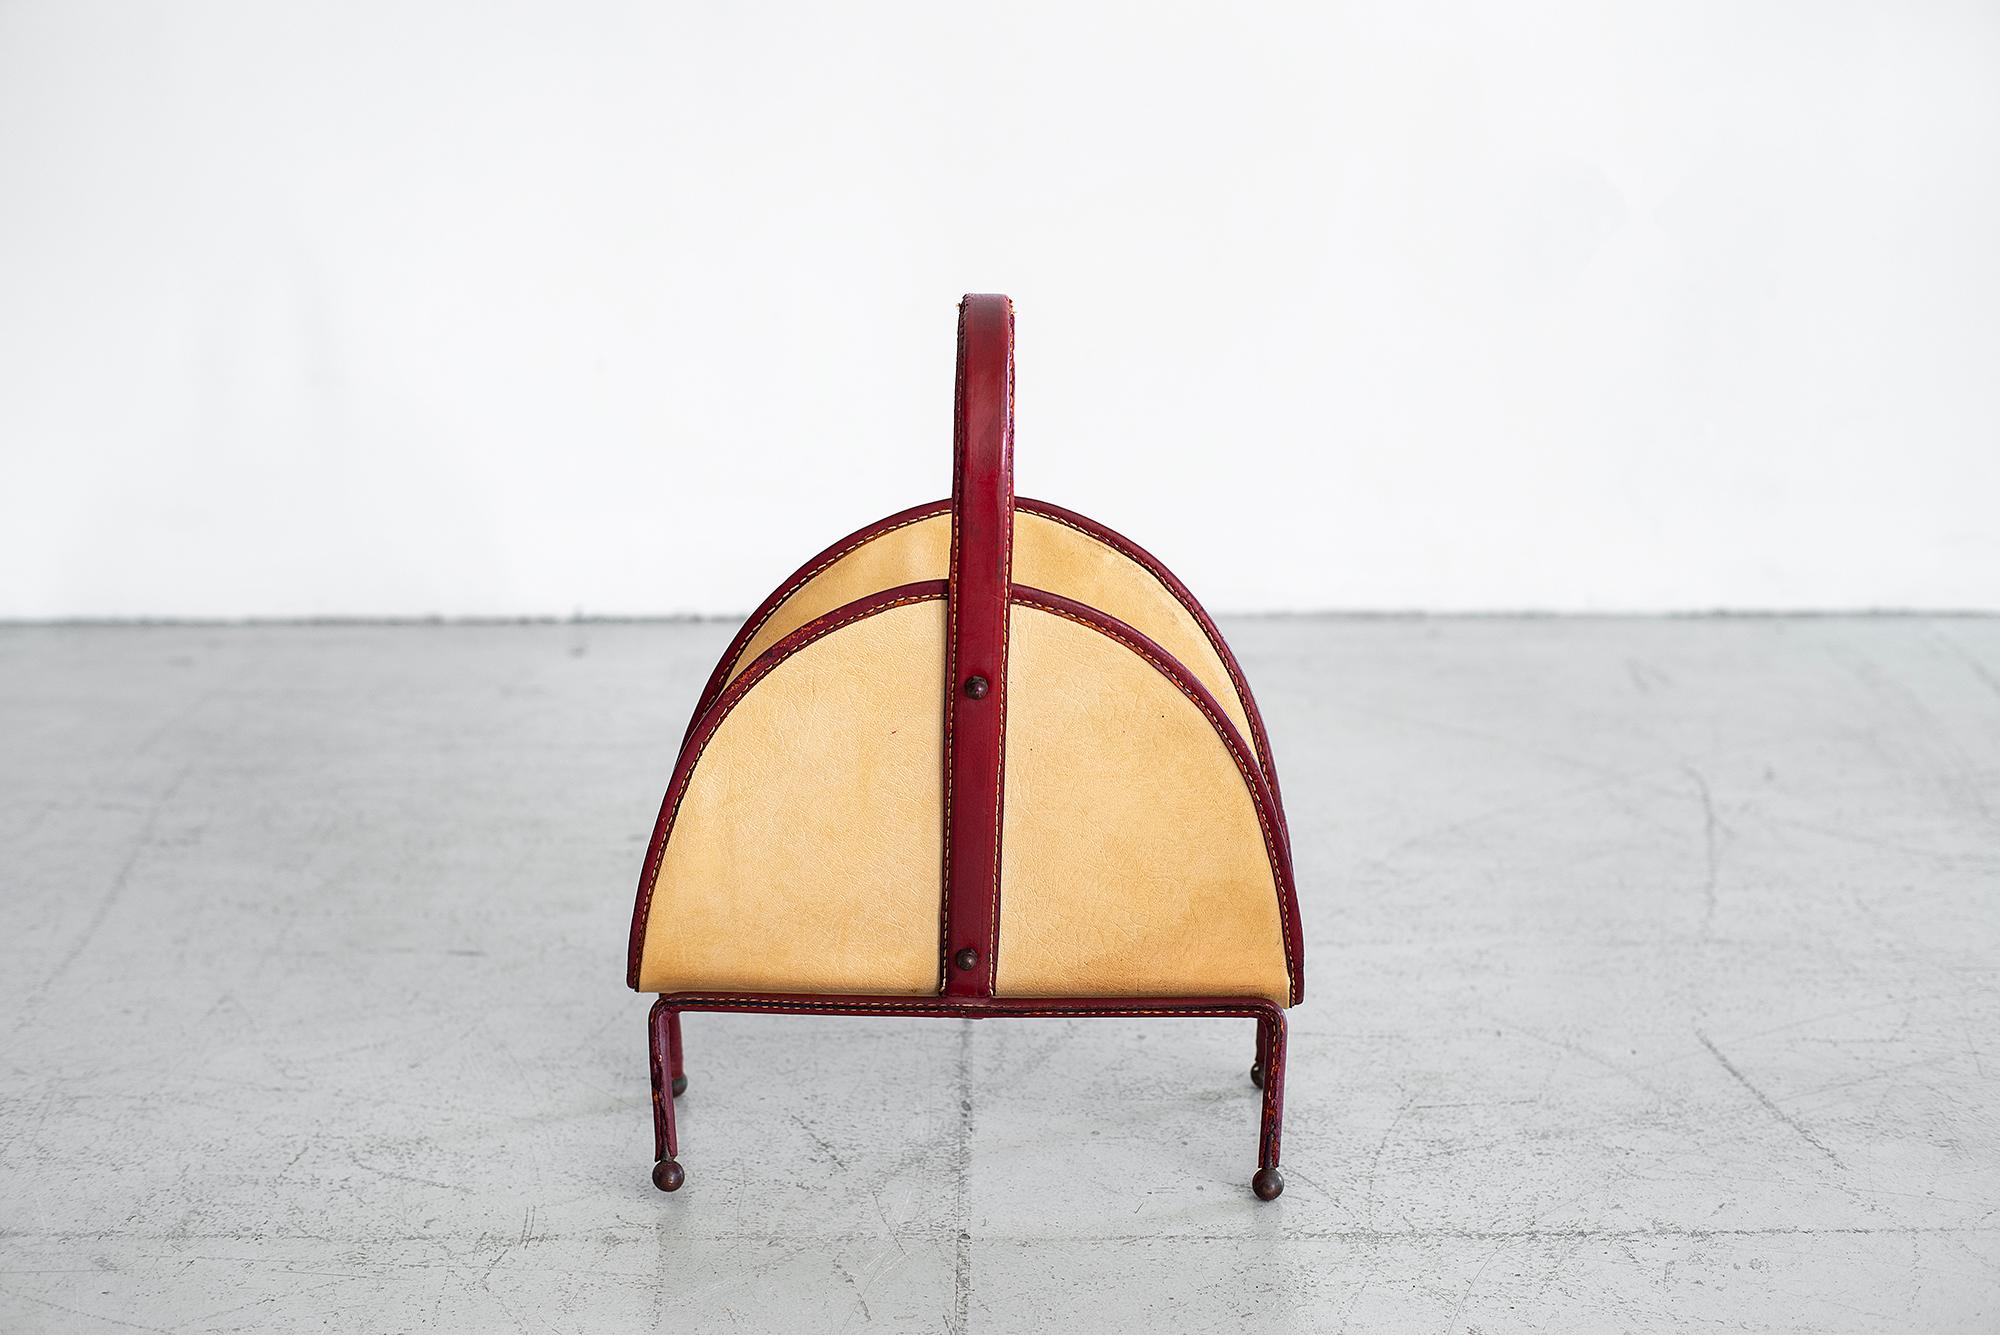 Rare Jacques Adnet magazine rack with tan and red leather, contrast stitching and brass ball tip feet. Beautiful, unique piece.
Some wear and crack in leather on leg.